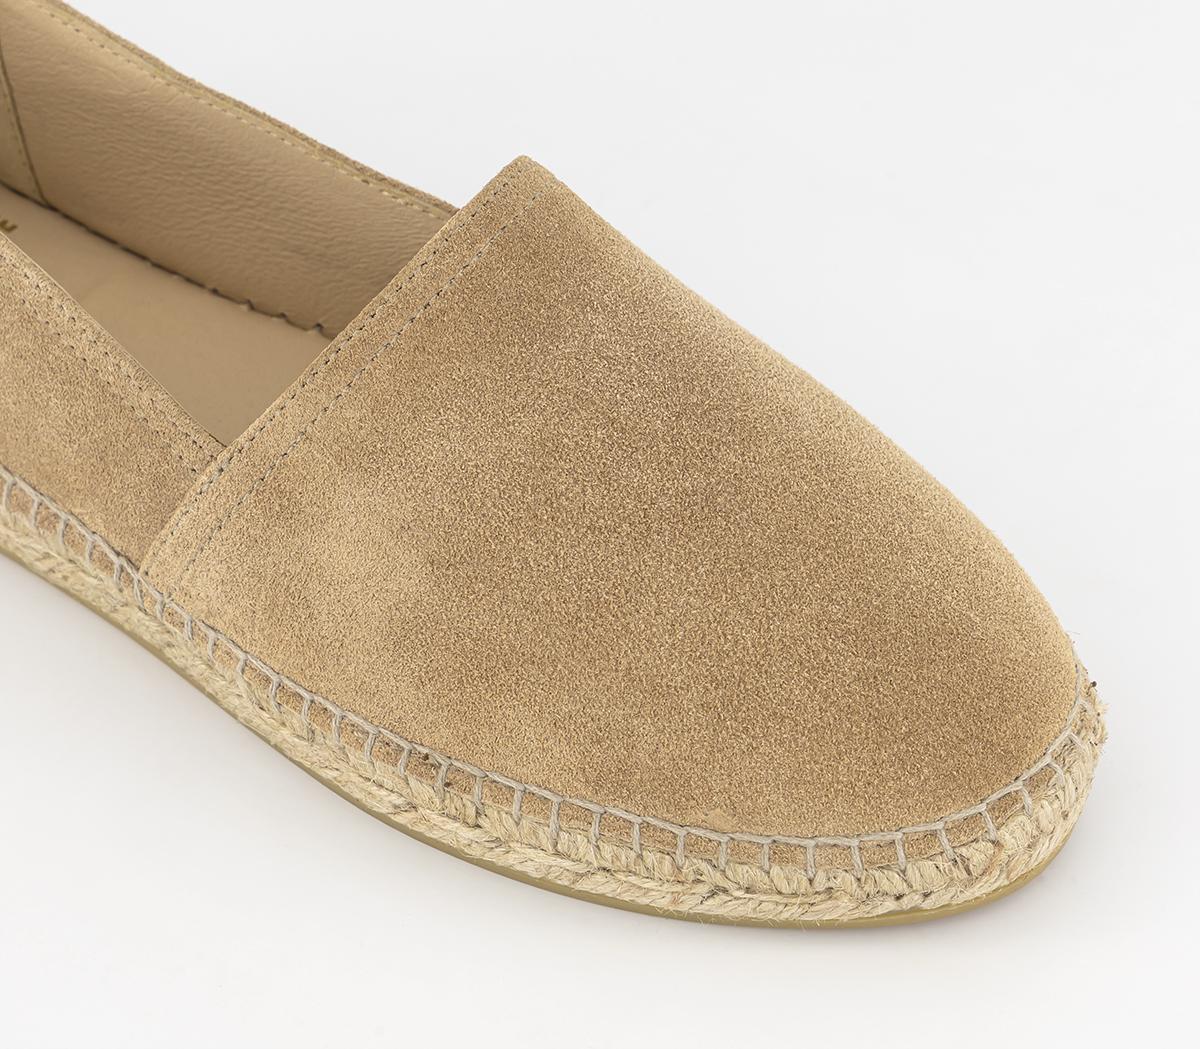 Gaimo for OFFICE Camping Slip On Espadrilles Tan Suede - Flat Shoes for ...